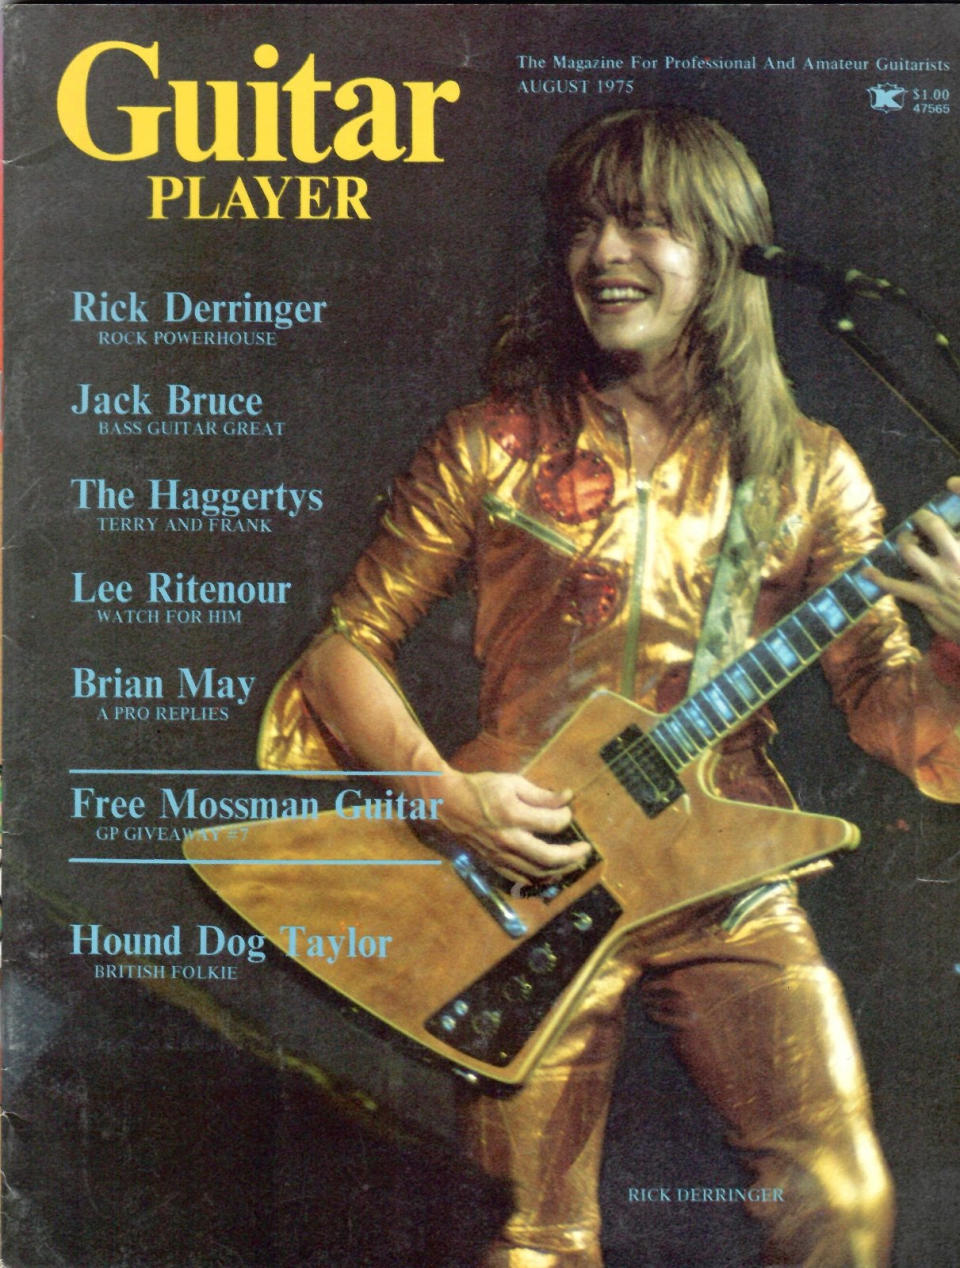 'Guitar Player' magazine Auguest 1975 cover